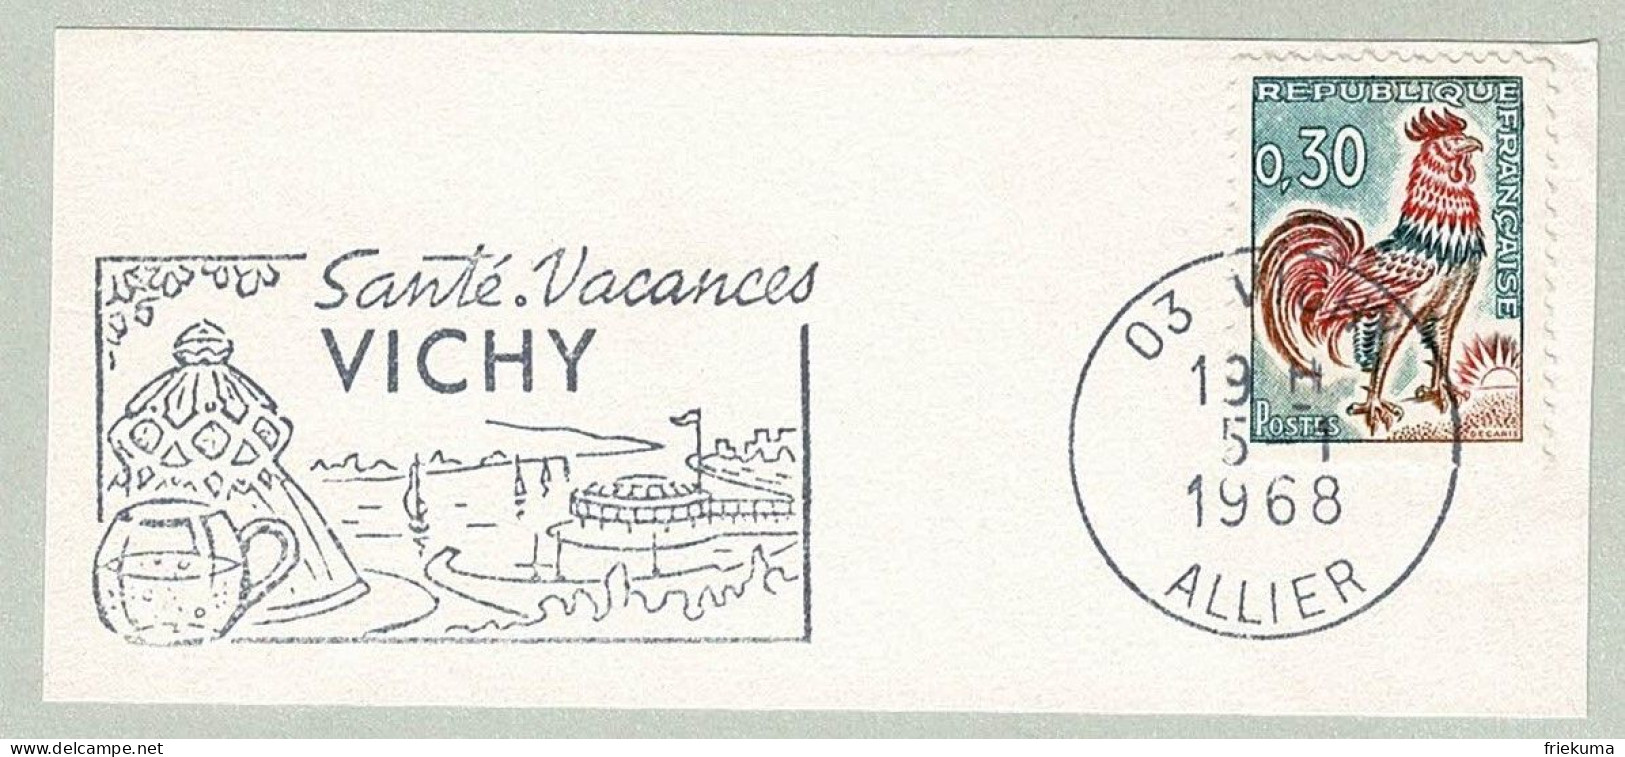 Frankreich / France 1968, Flaggenstempel Vichy, Thermalbad / Centre Thermal - Thermalisme